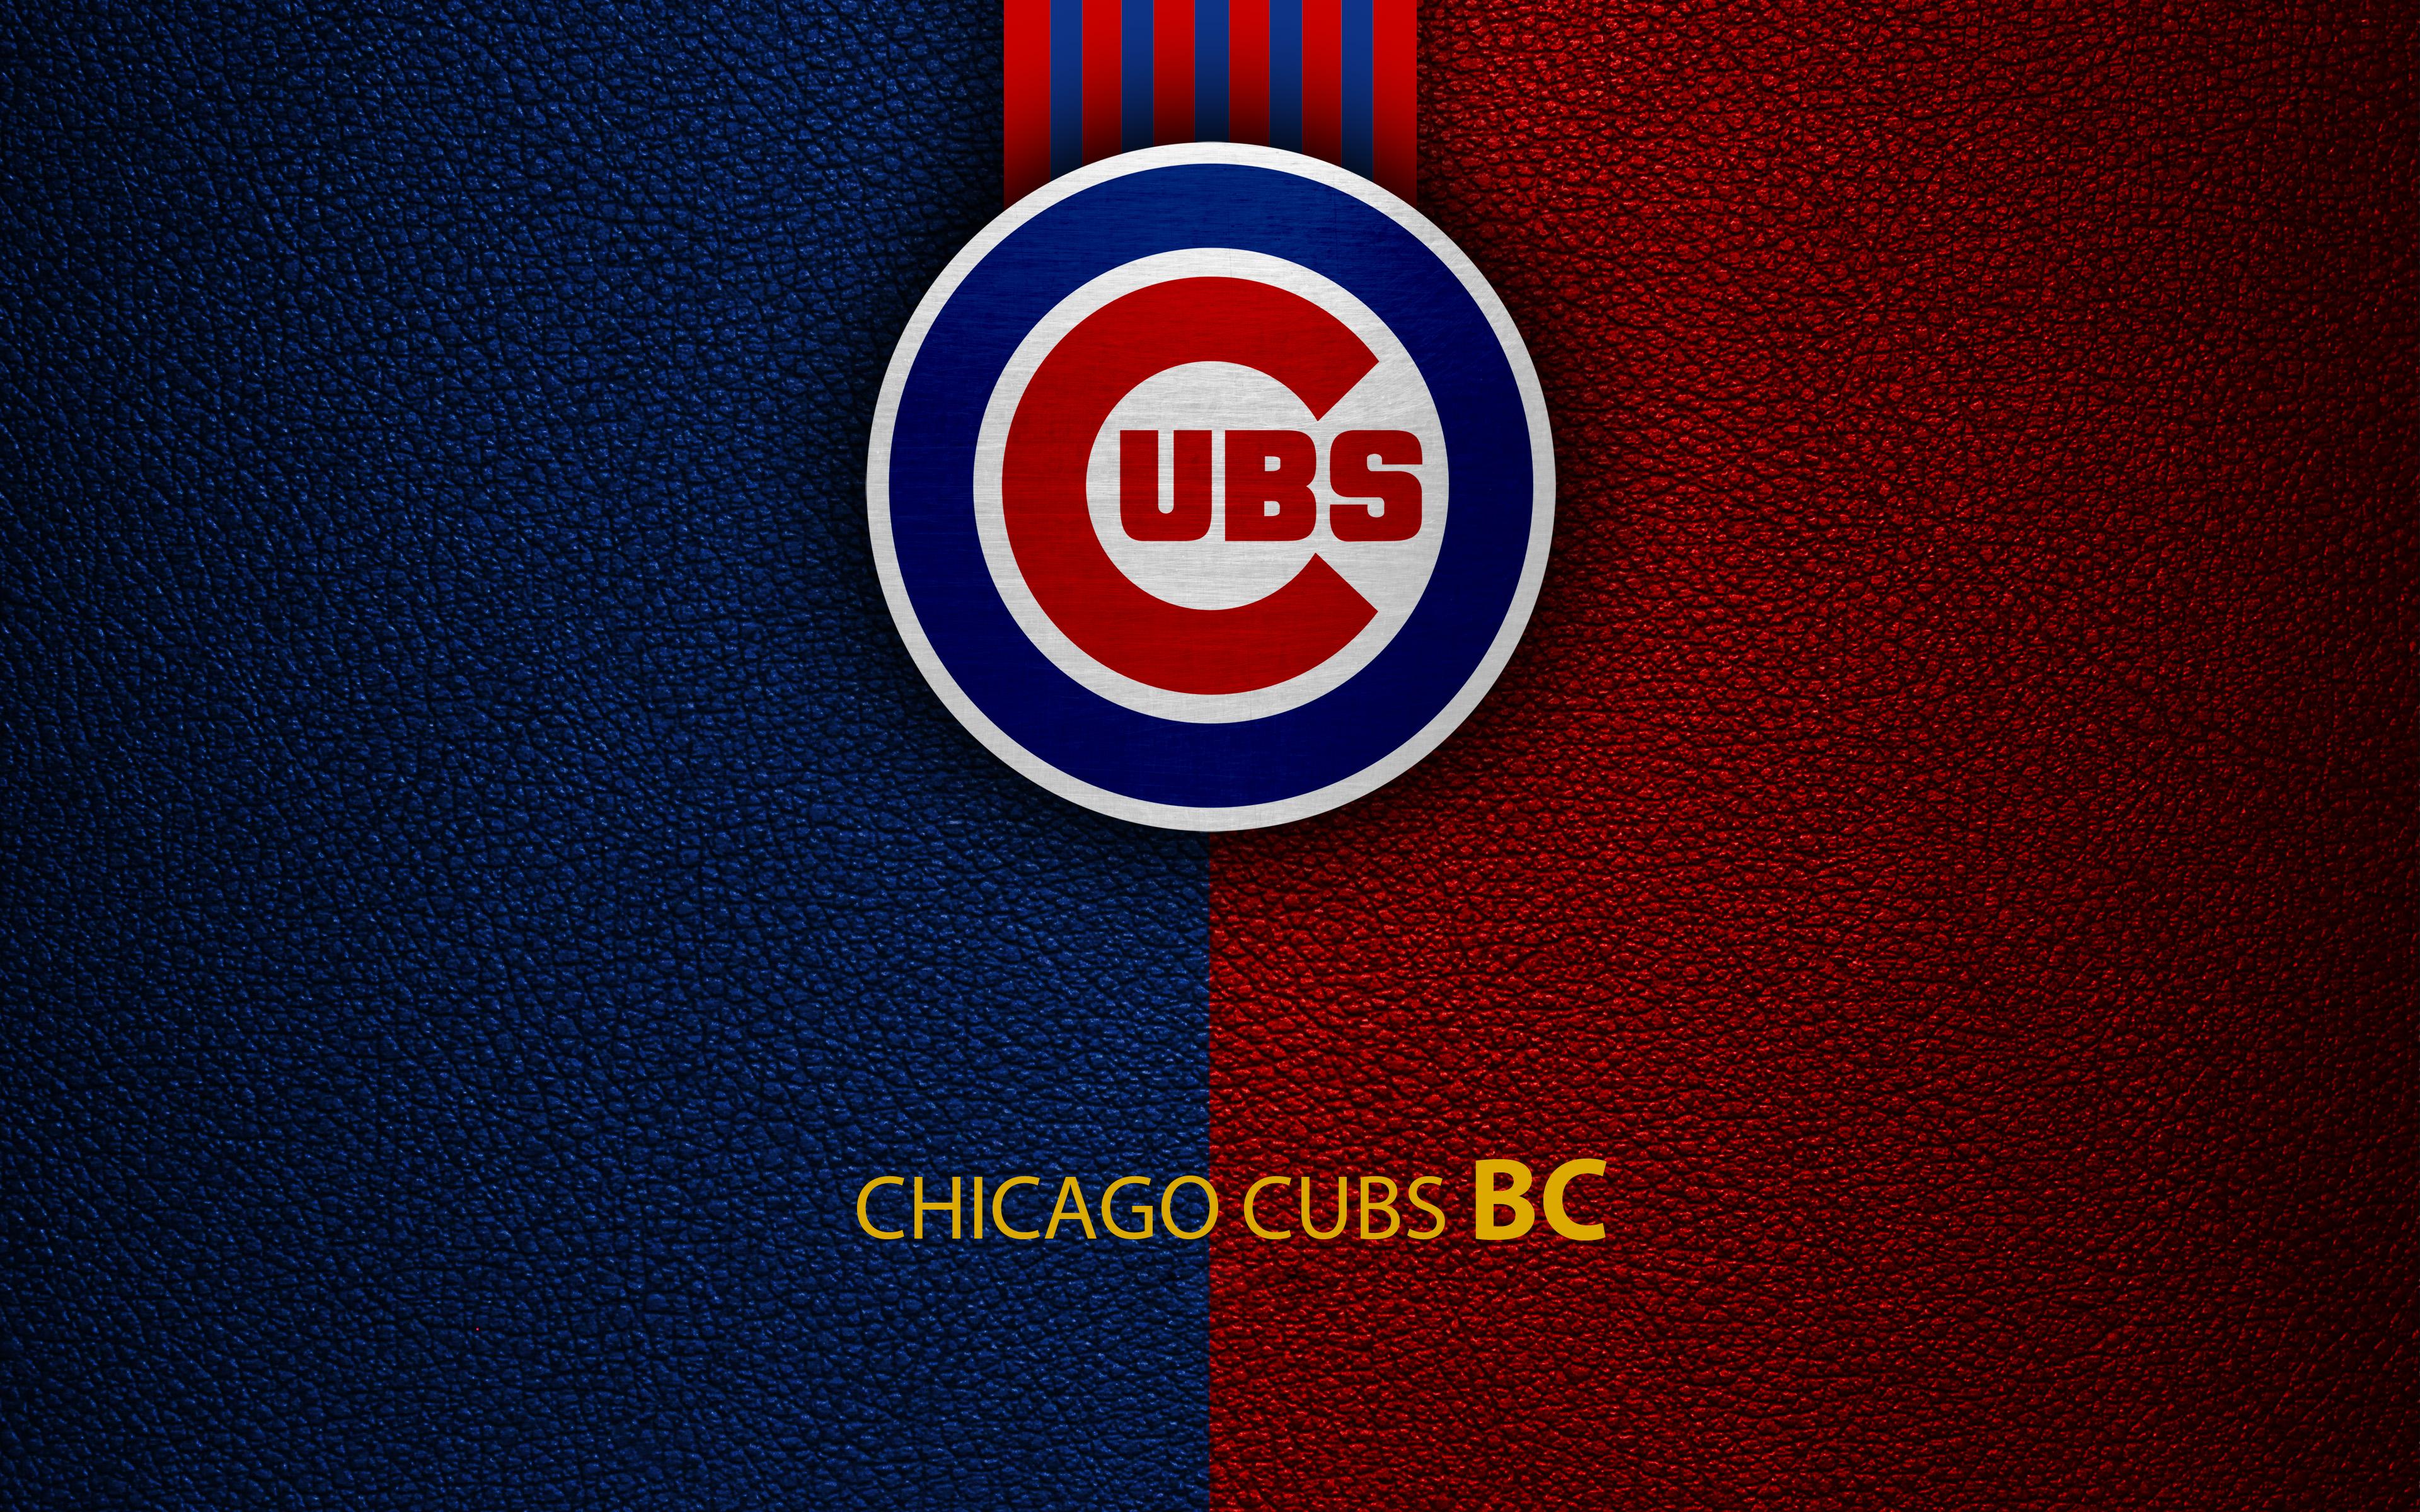 Chicago Cubs 4k Ultra HD Wallpaper. Background Imagex2400